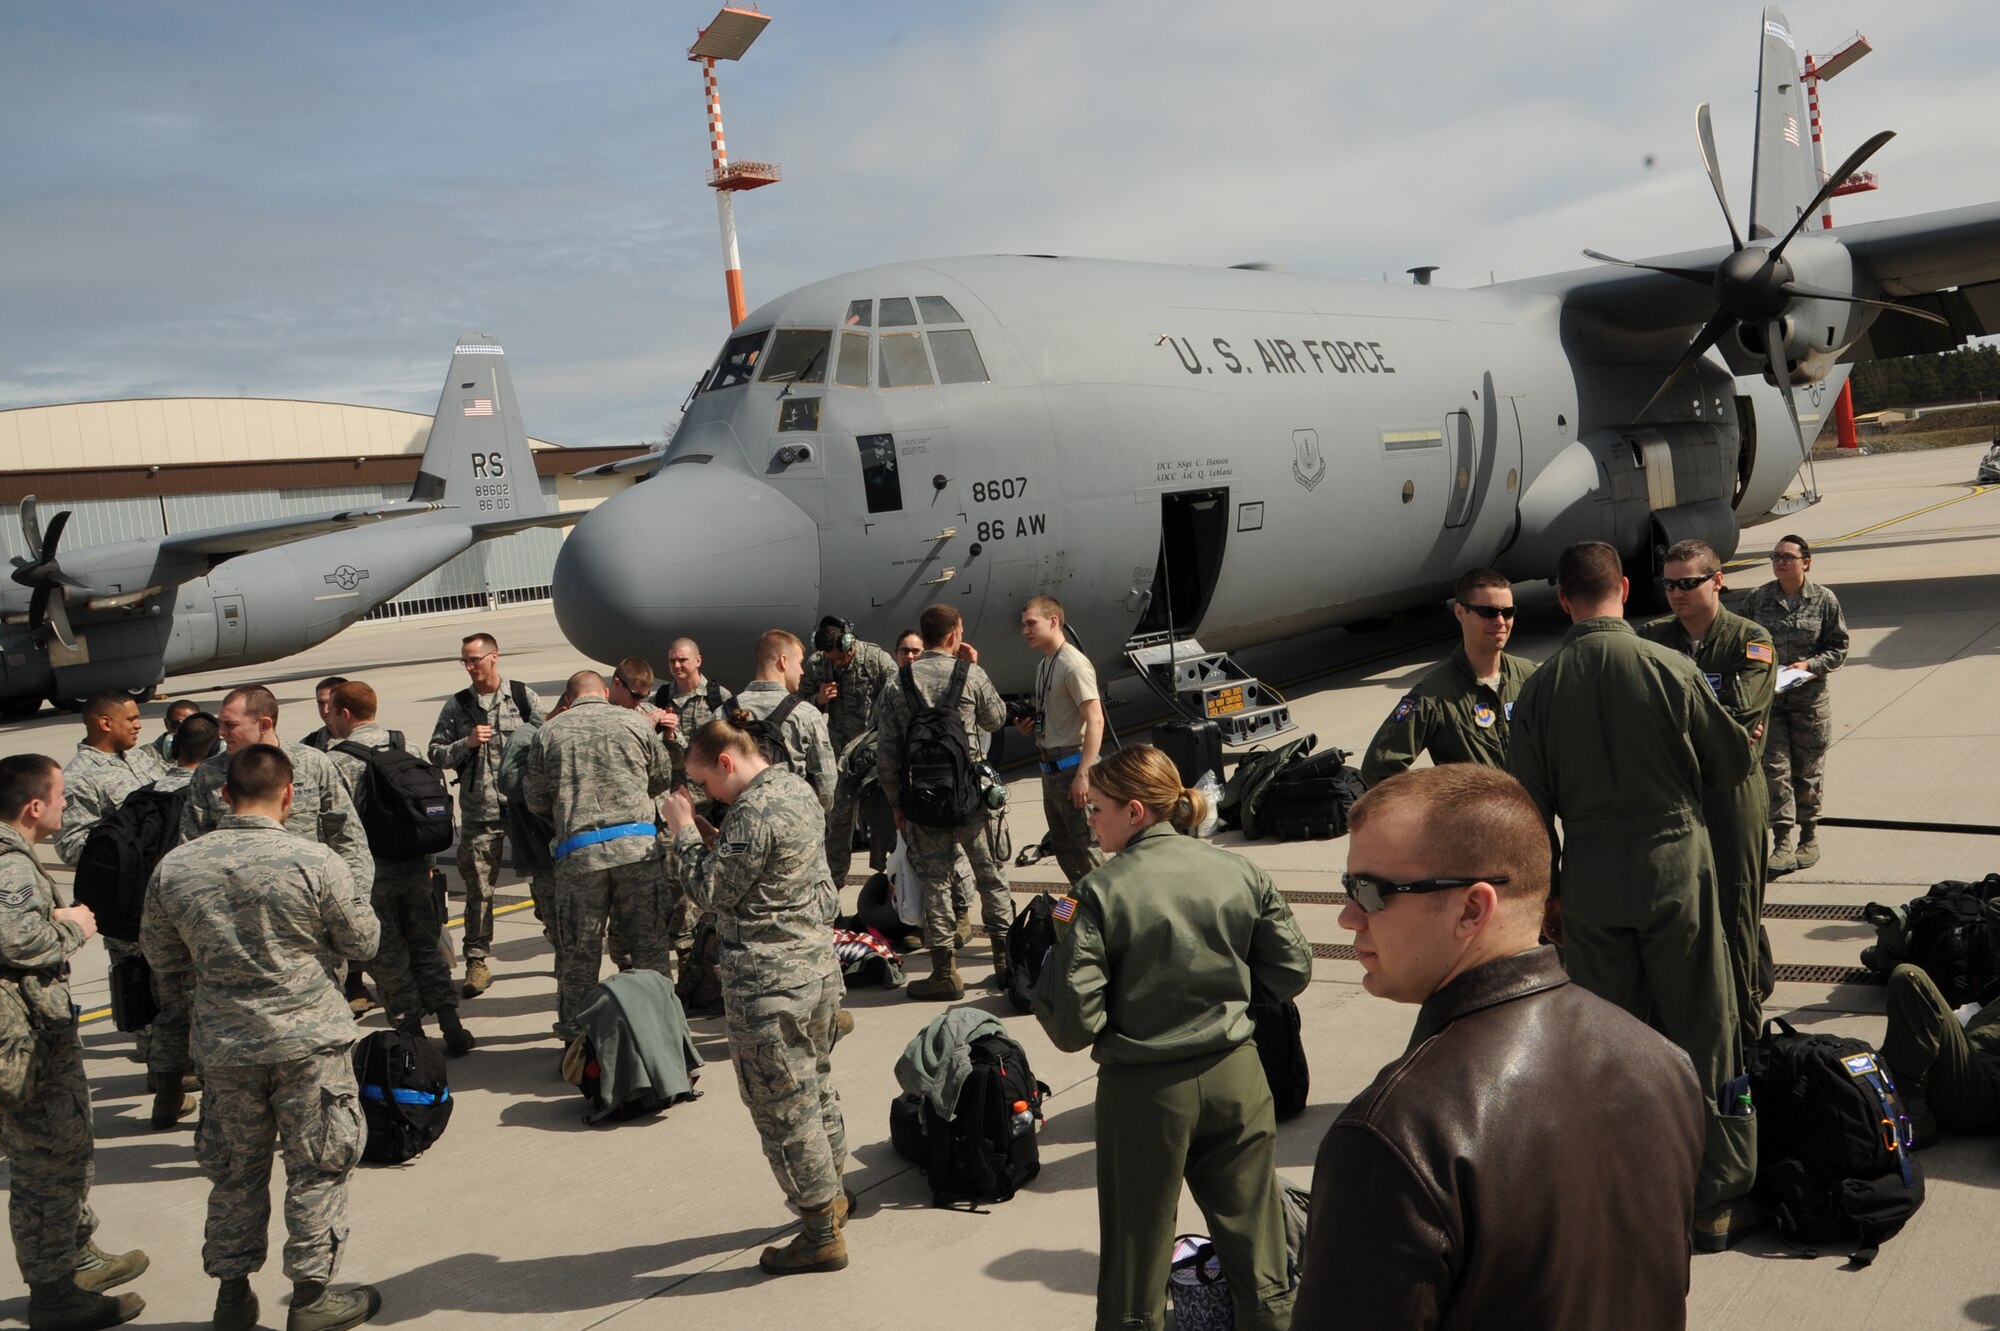 Airmen prepare to board a C-130J Super Hercules for Exercise Carpathian Spring located in Romania, April 14, 2013, Ramstein Air Base, Germany. The exercise runs through April 21 and is designed for aircrews to train as well as help build a partnership capacity with Romanians. (U.S. Air Force photo/Airman 1st Class Hailey Haux)